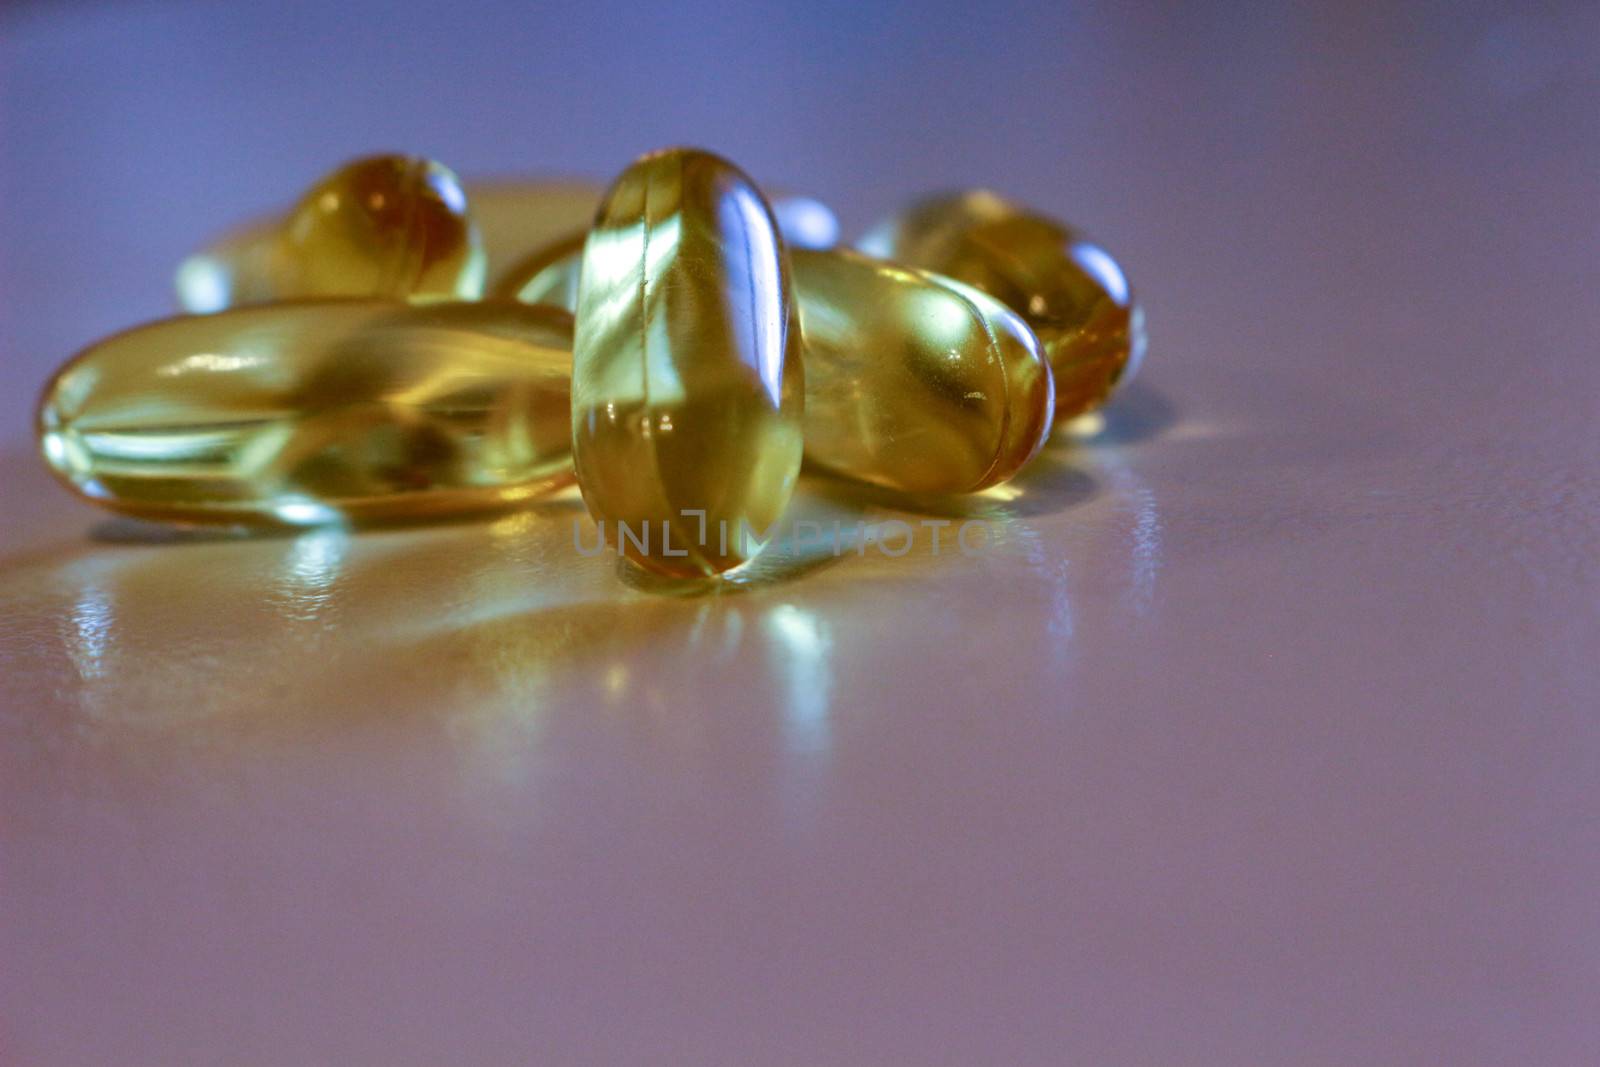 Close up yellow Cod Liver Oil capsule on white background, fish oil is a dietary supplement derived from liver of cod fish, have omega-3 fatty acids, EPA, DHA, vitamin A and .